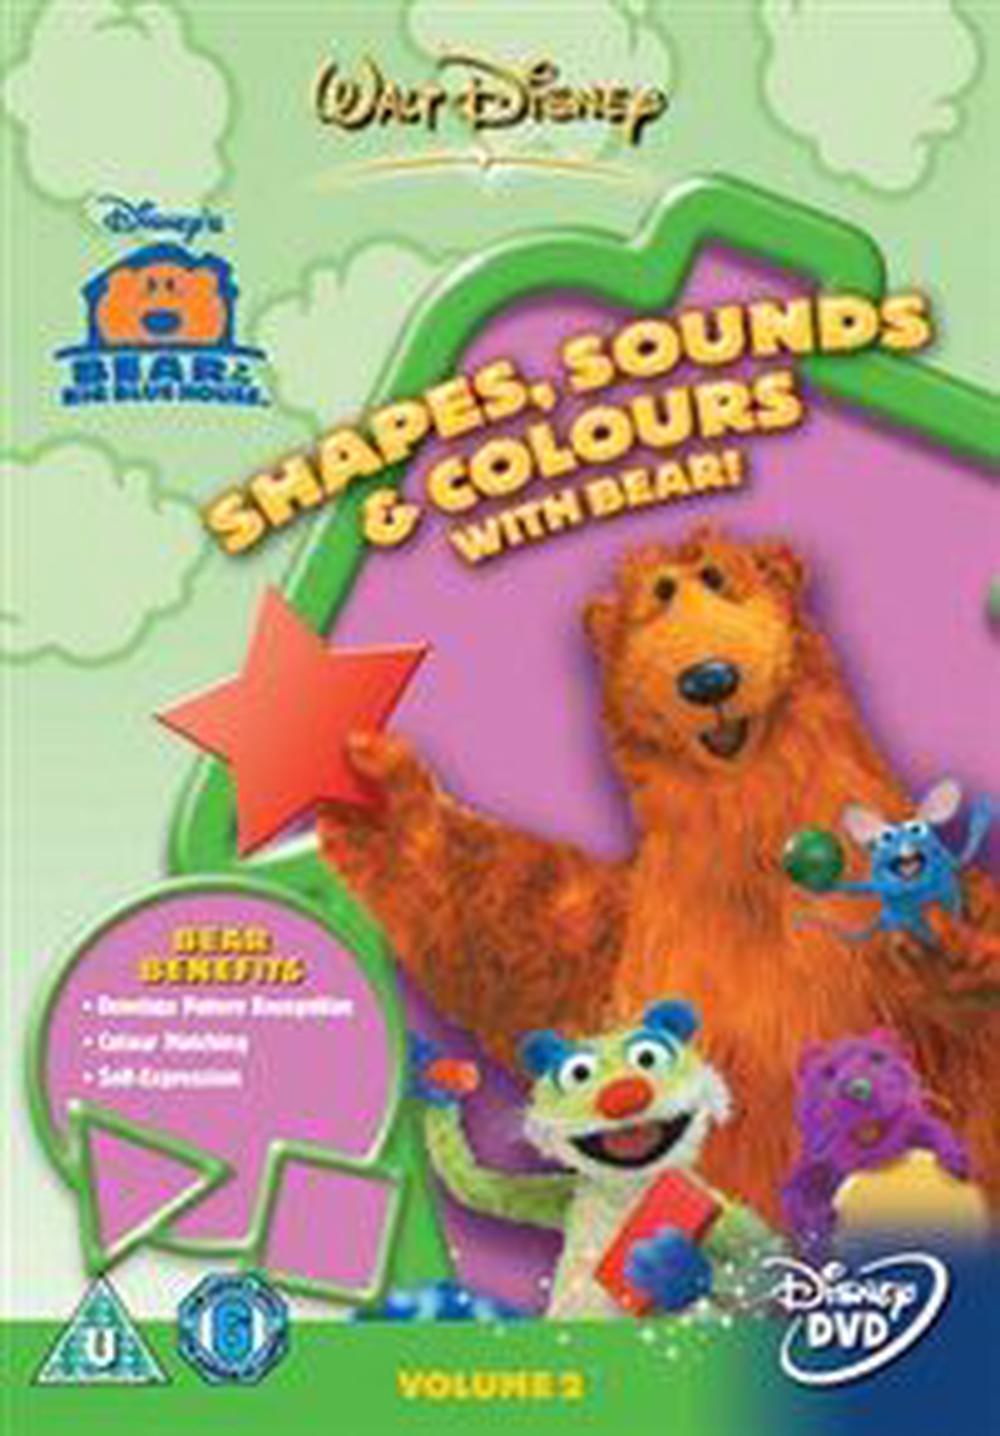 Bear in the Big Blue House: Shapes, Sounds and Colours With Bear - DVD ...